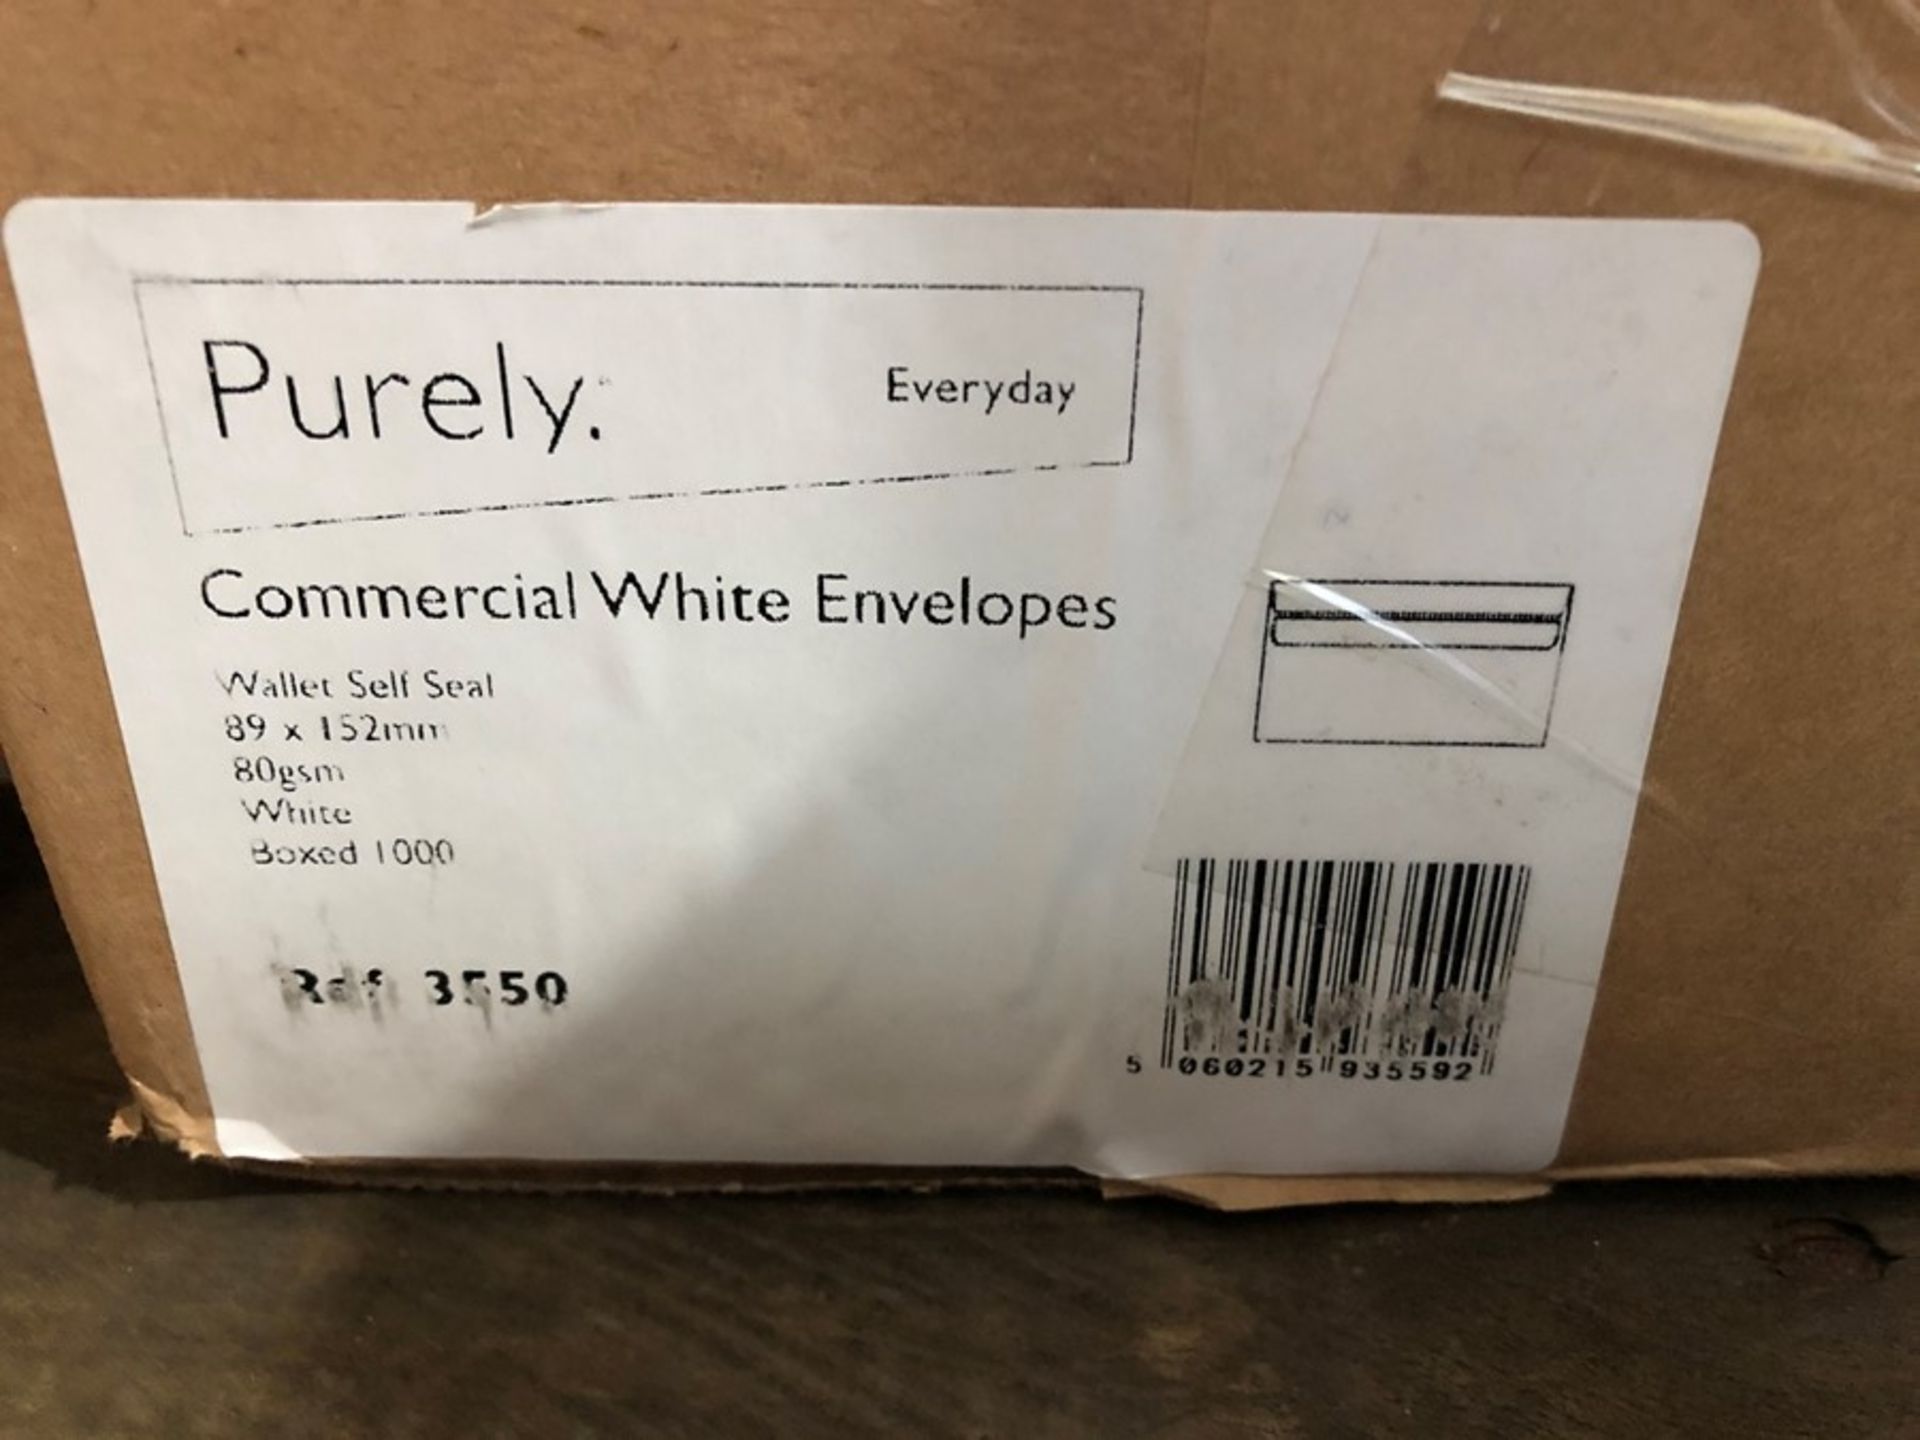 1 BOXED SET TO CONTAIN 1000 PURELY EVERYDAY COMMERCIAL WHITE ENVELOPES (PUBLIC VIEWING AVAILABLE)